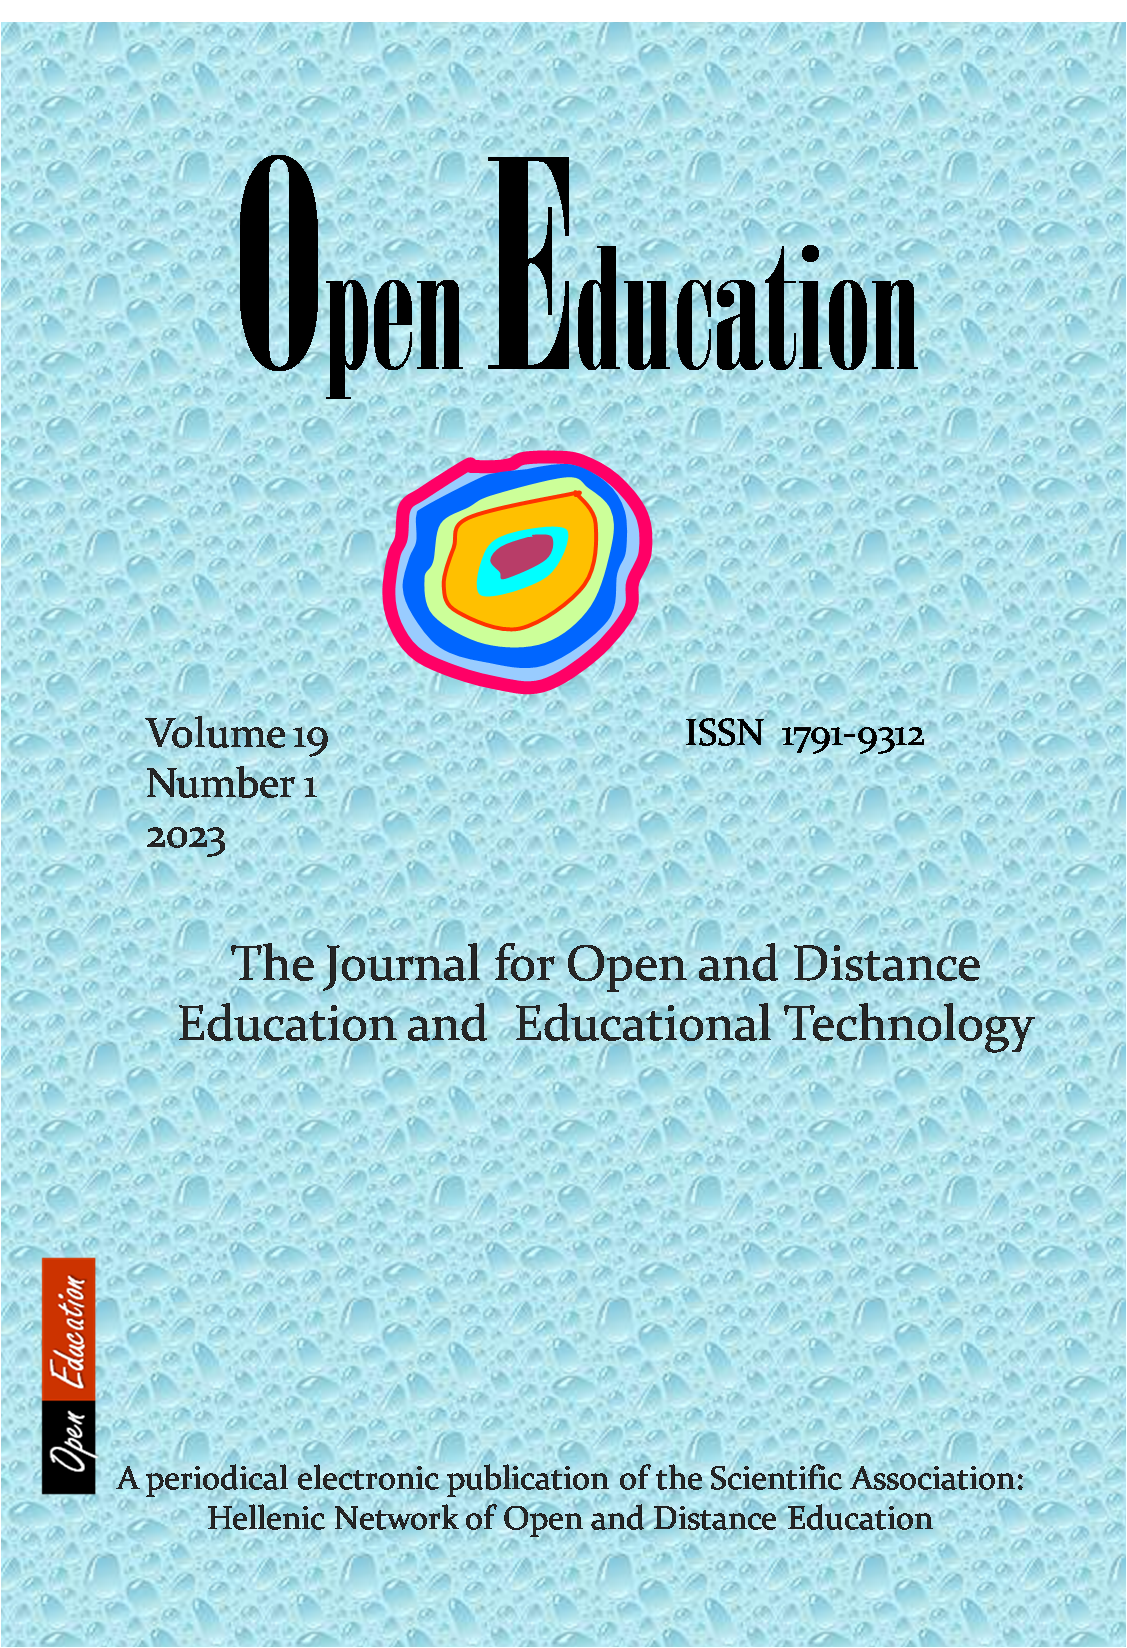 Open Education - The Journal for Open and Distance Education and Educational Technology